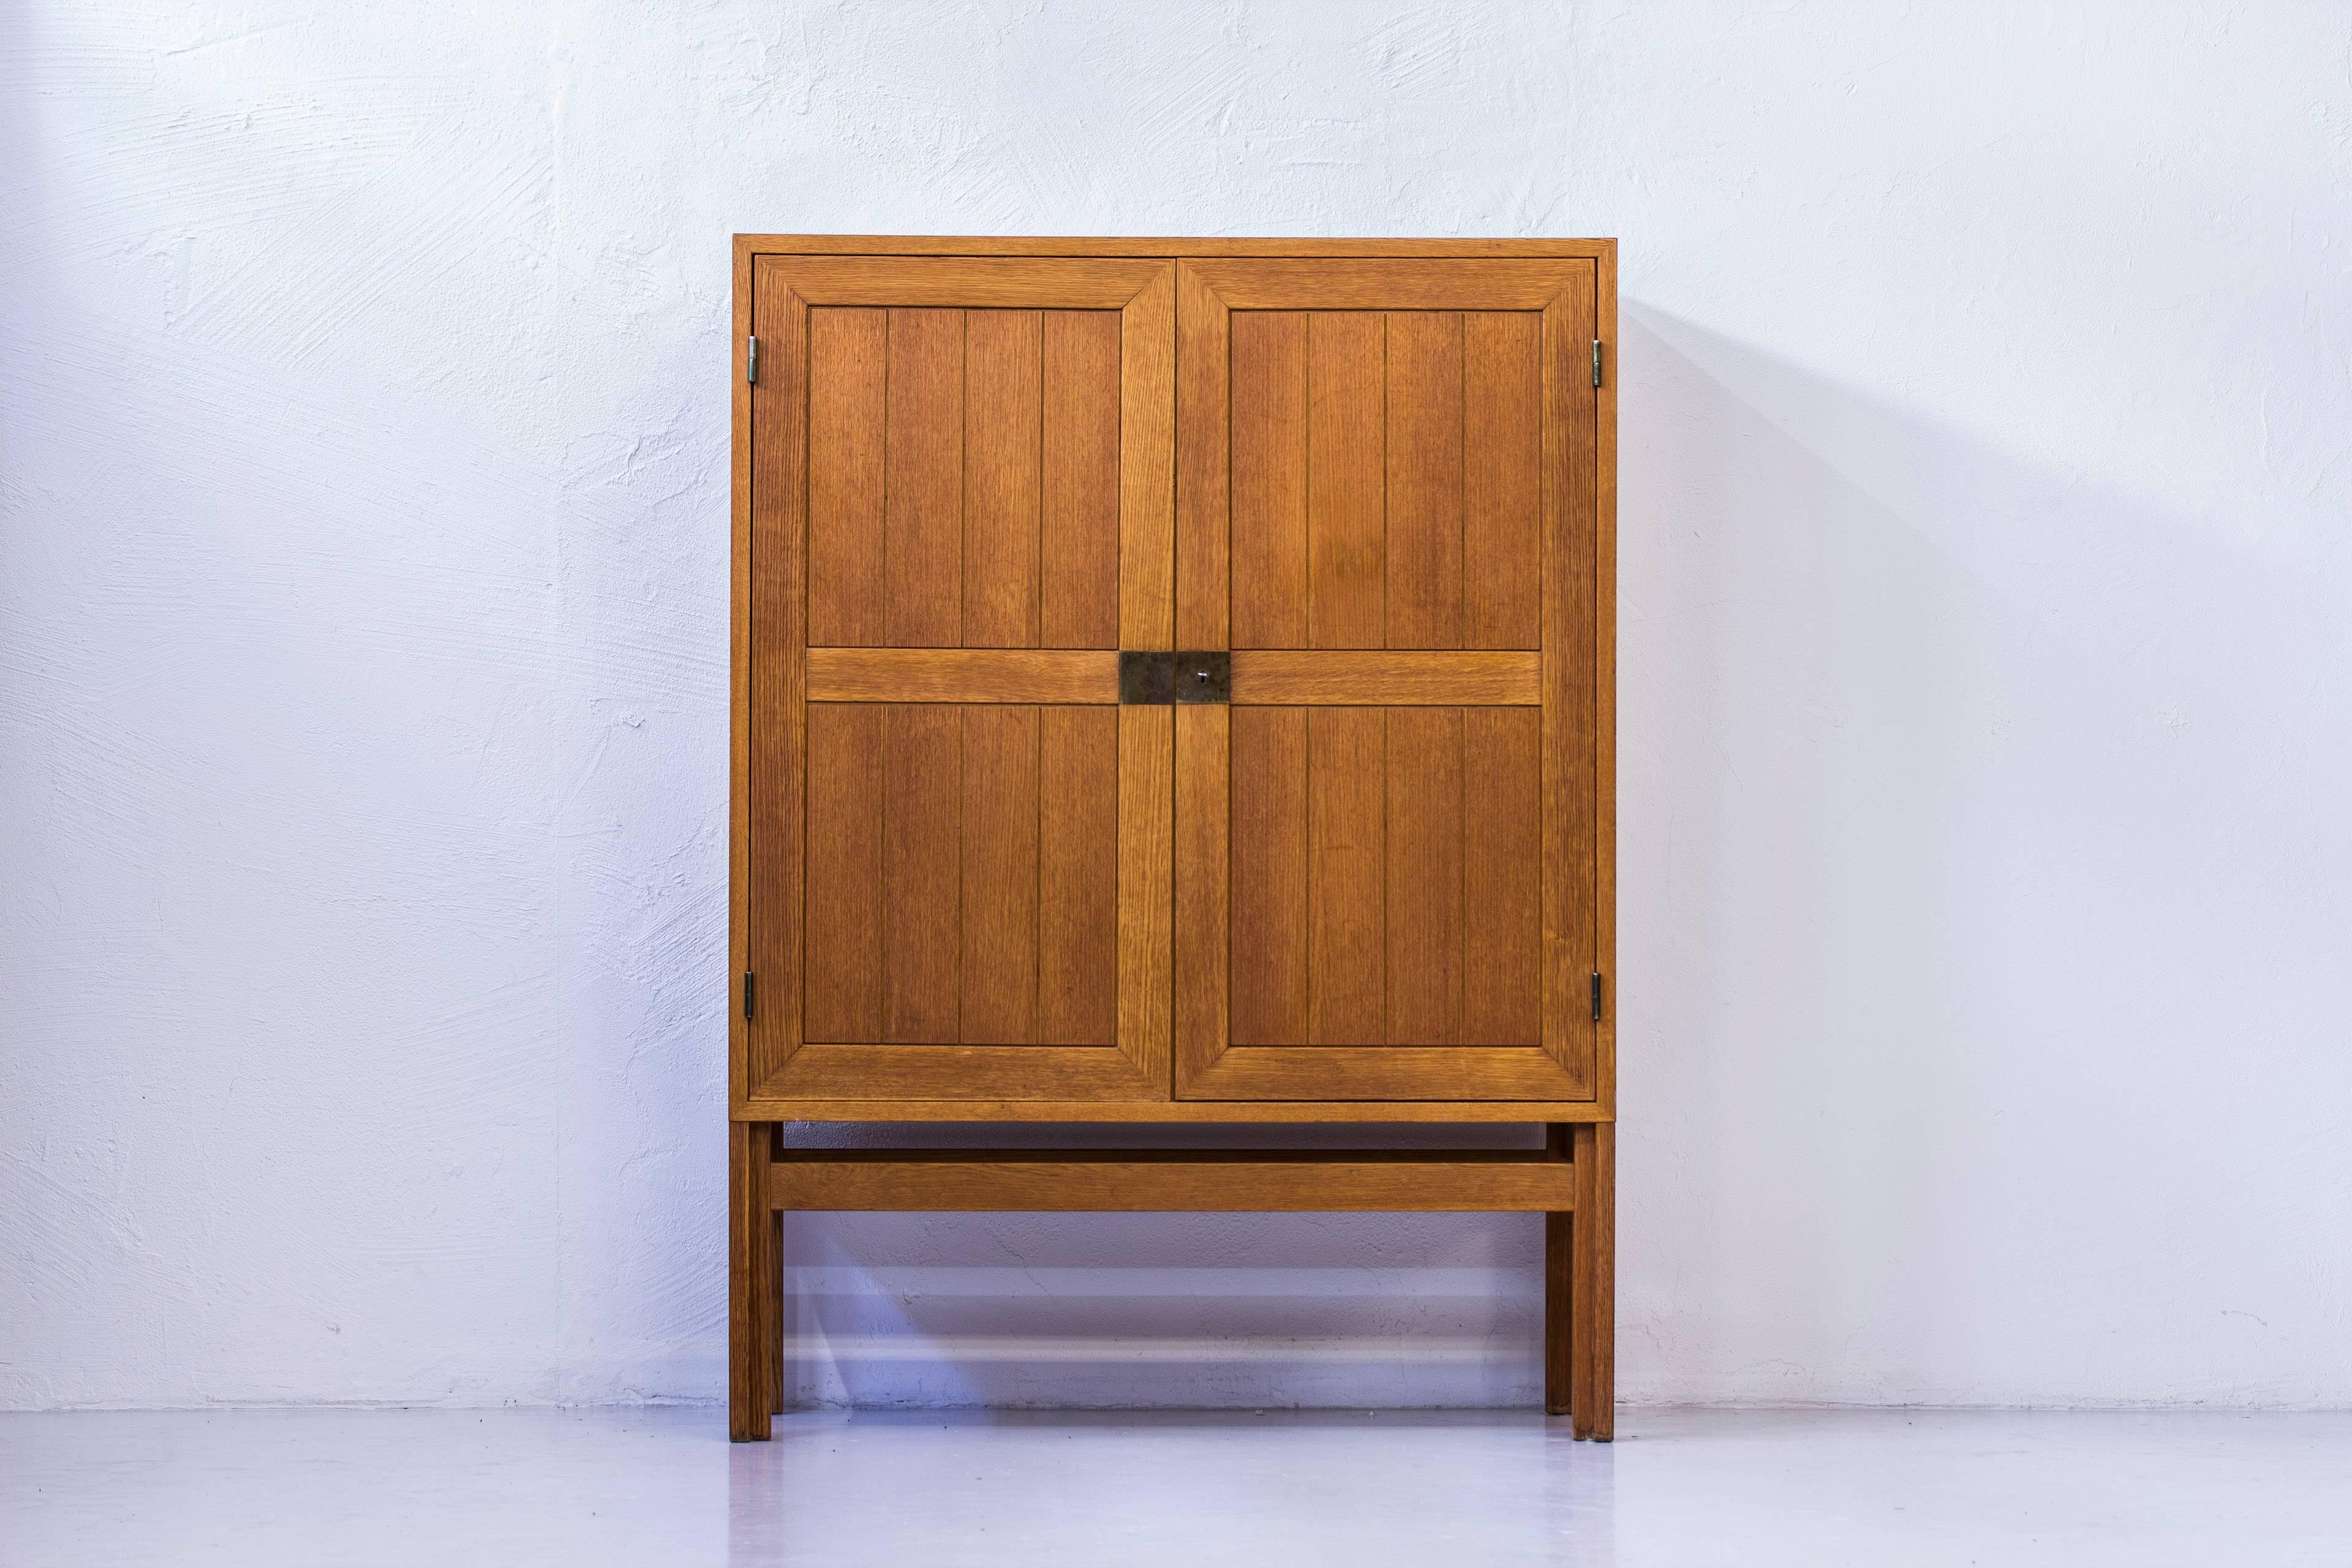 Cabinet designed by Kurt Østervig during the 1960s. Produced by Vamo furniture factory in Denmark. Made from oiled oak on the outside with brass hinges and details on doors. Oak inside with teak veneer on the inside of the doors. Three Adjustable